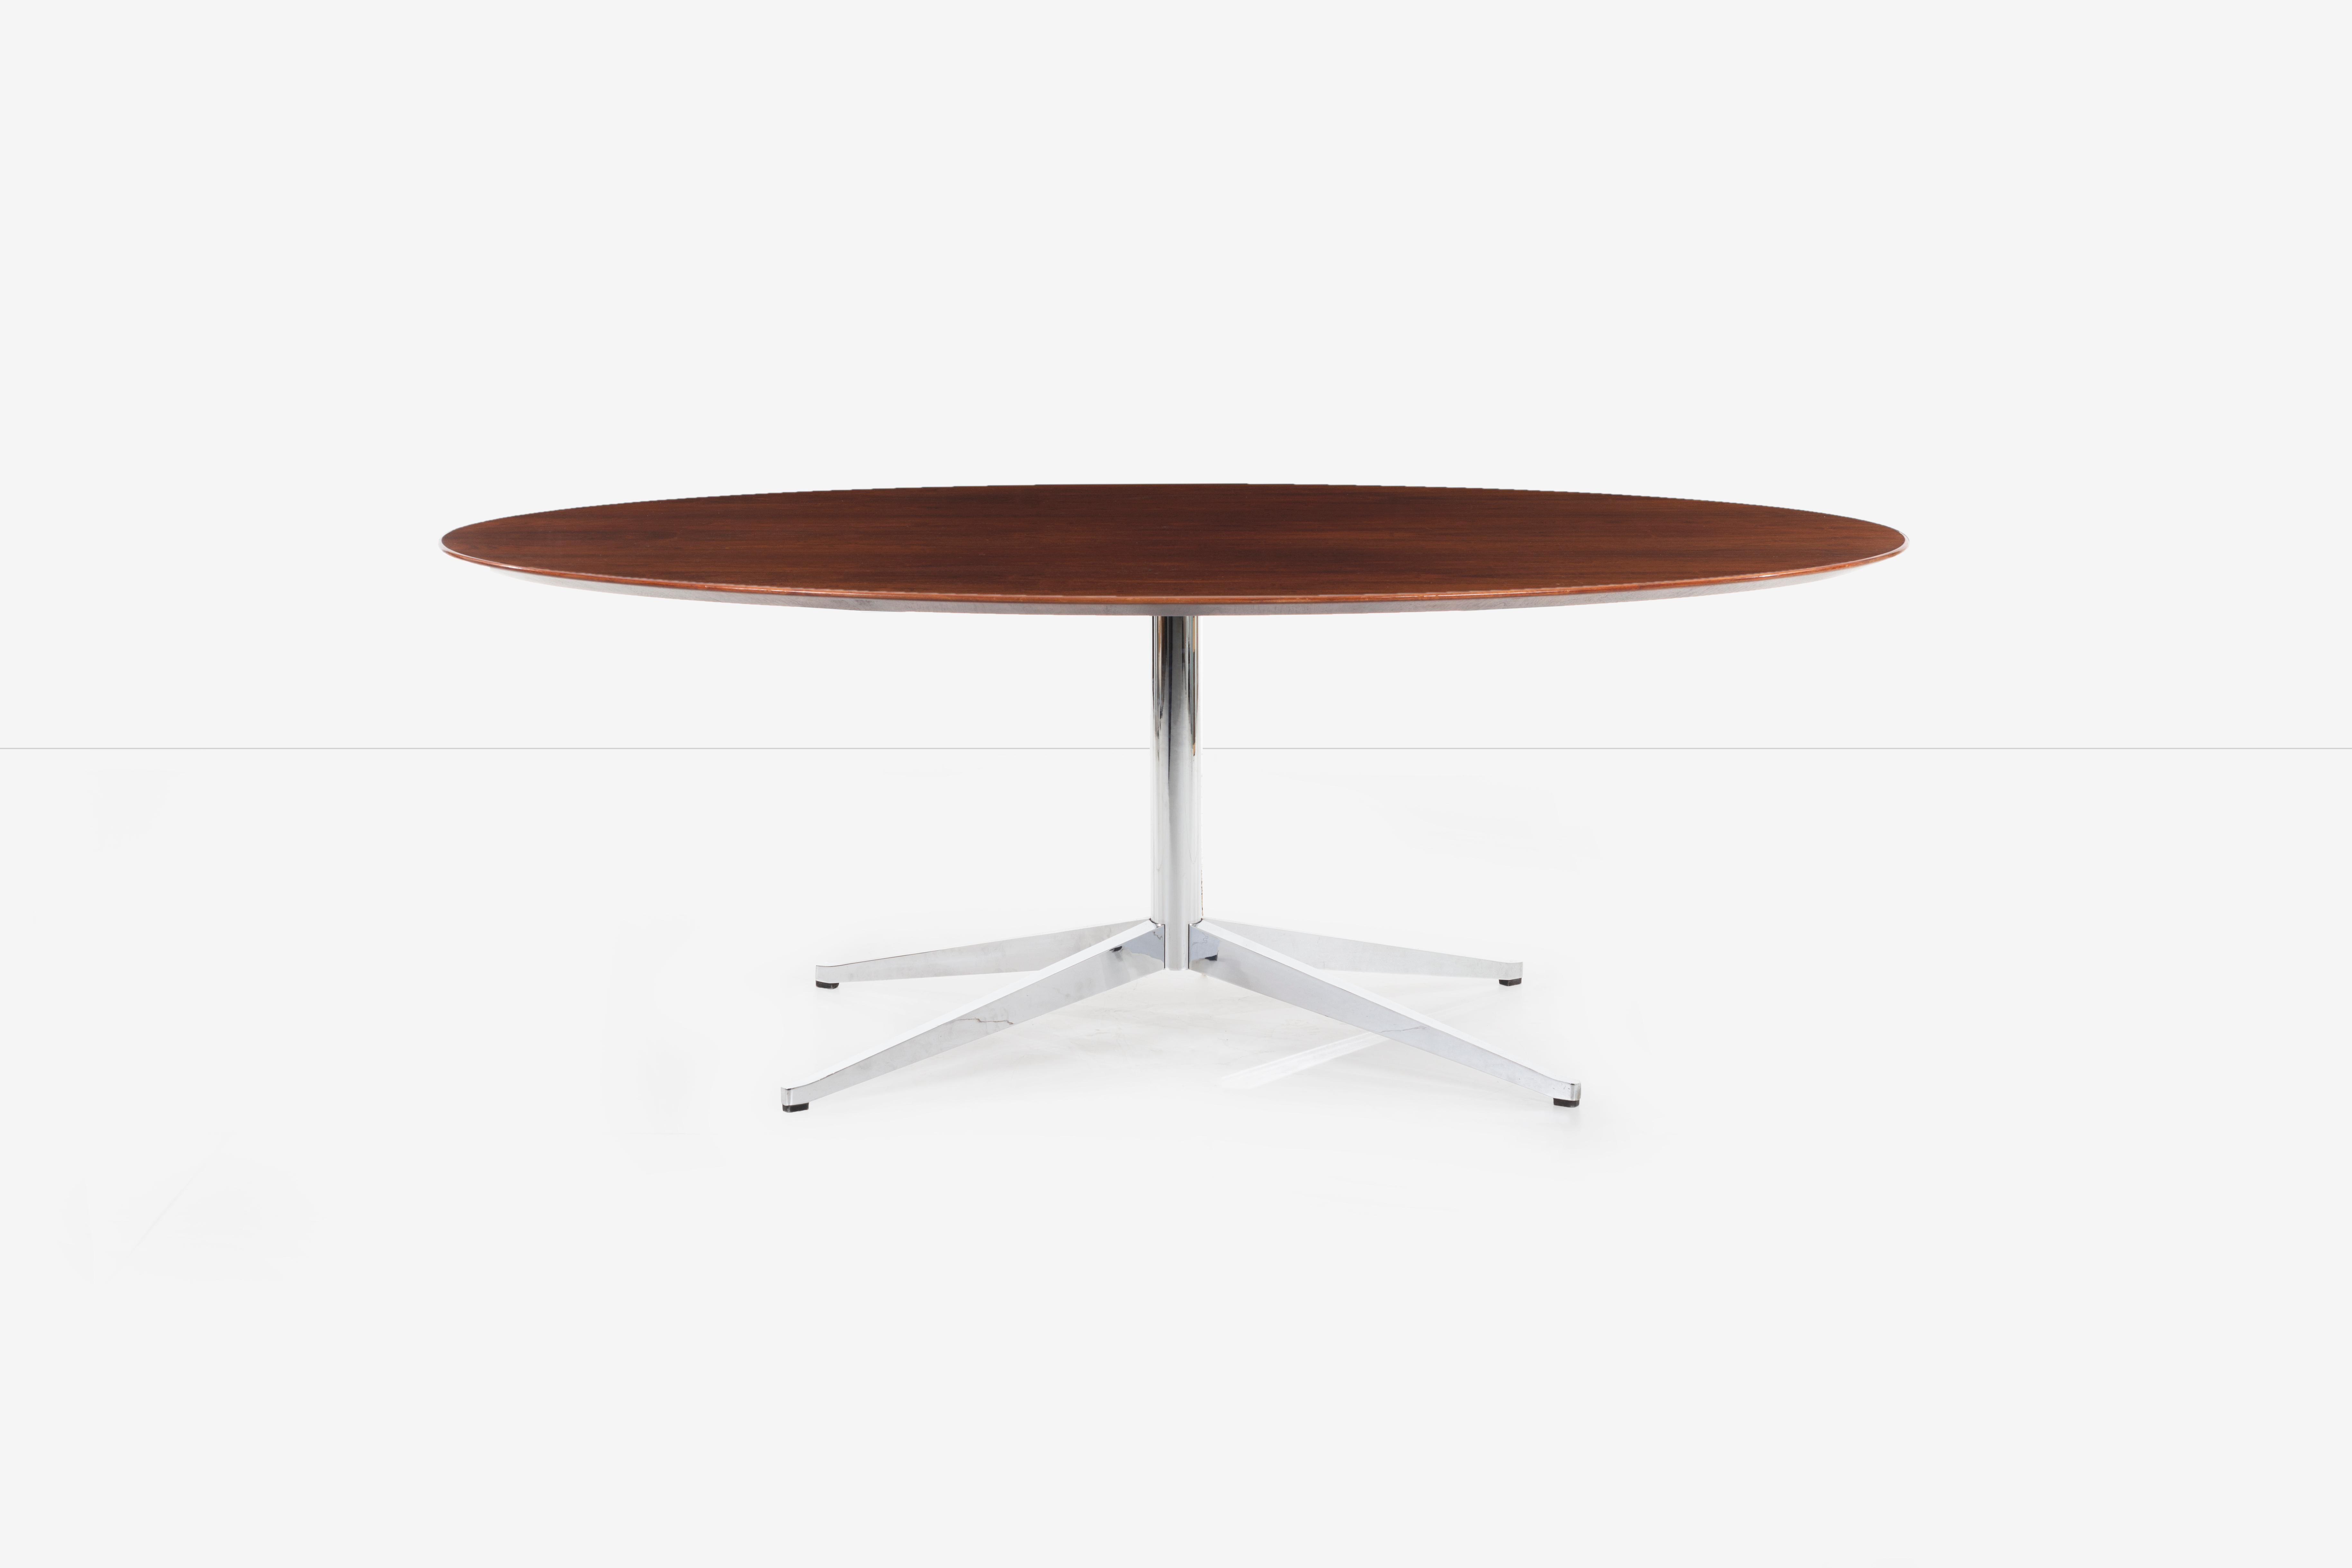 Florence Knoll rosewood dining table or desk, highly figured rosewood veneer top with beveled edge detail. Solid steel brushed chrome-plated stem and base.
[label on underside Knoll International].